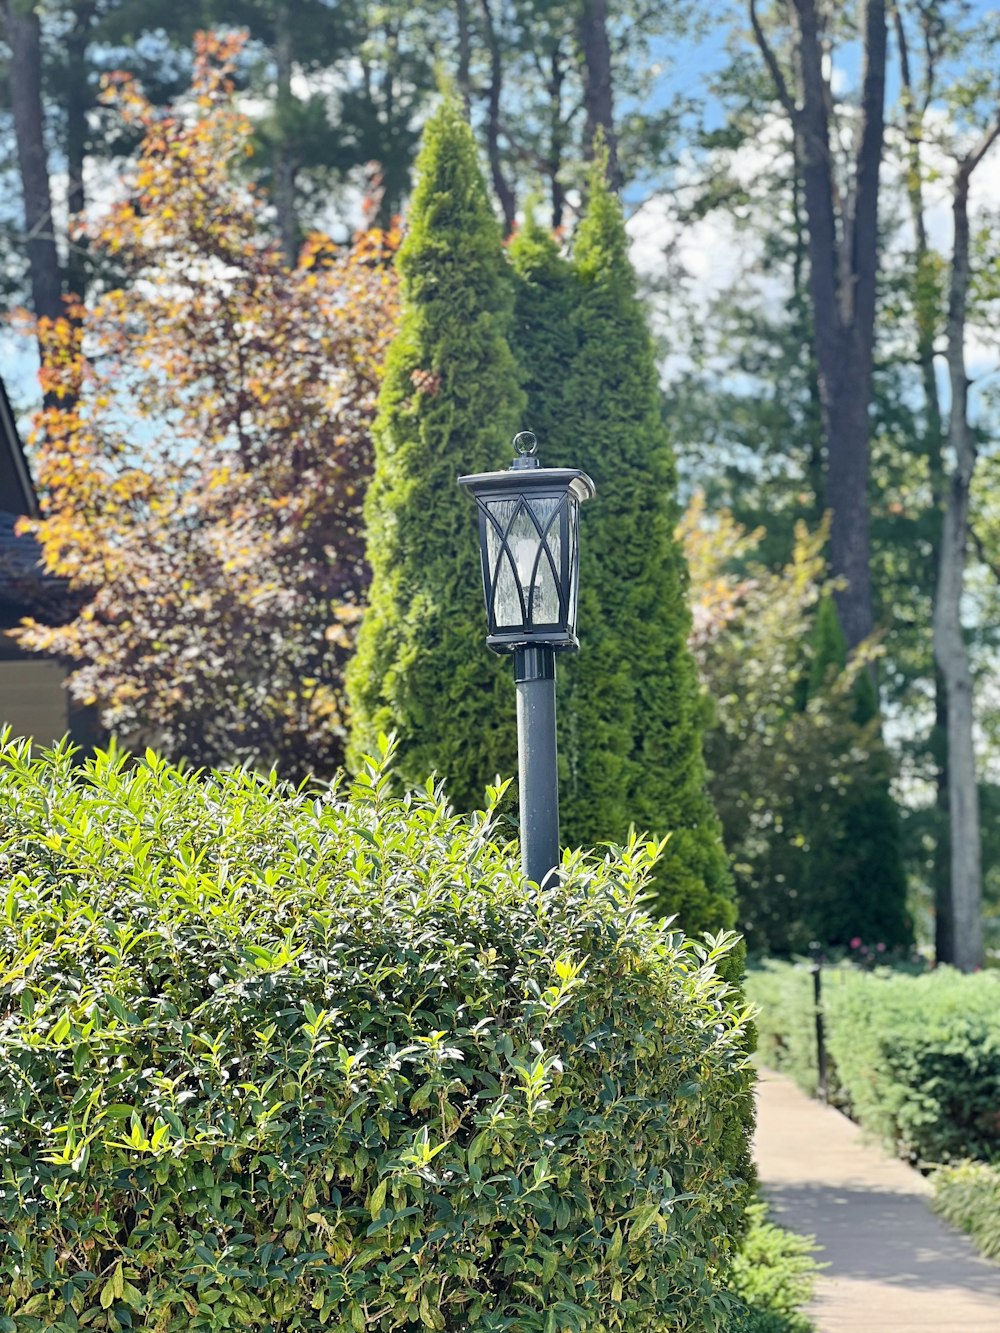 a lamp post in the middle of a garden